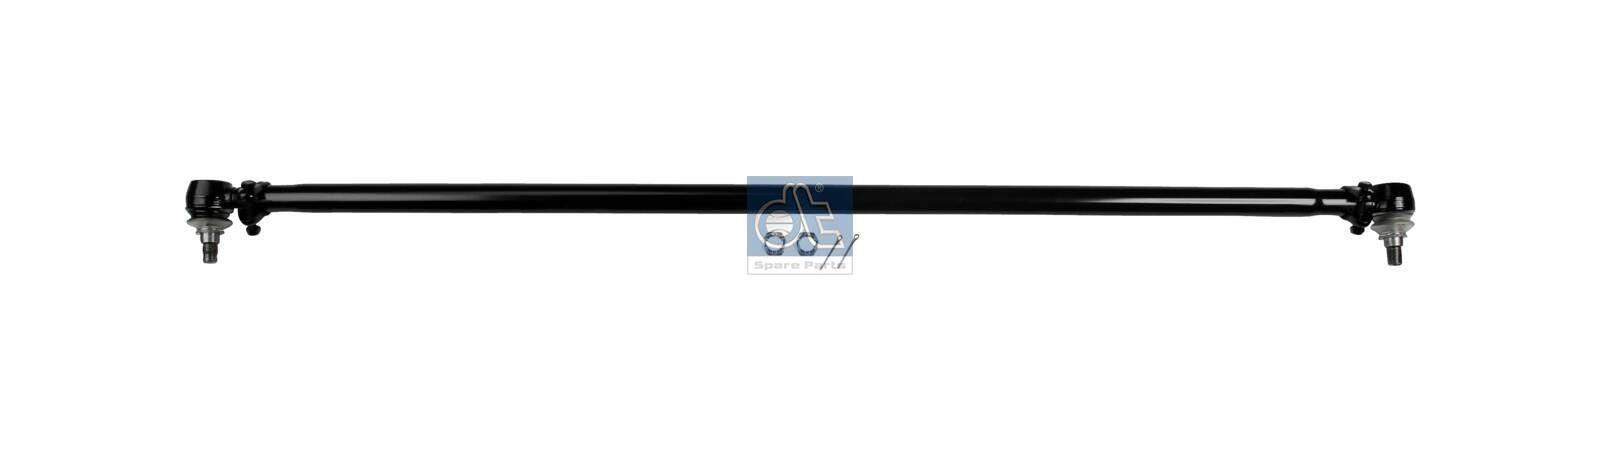 DT Spare Parts 4.64595 Rod Assembly A 676 330 03 03